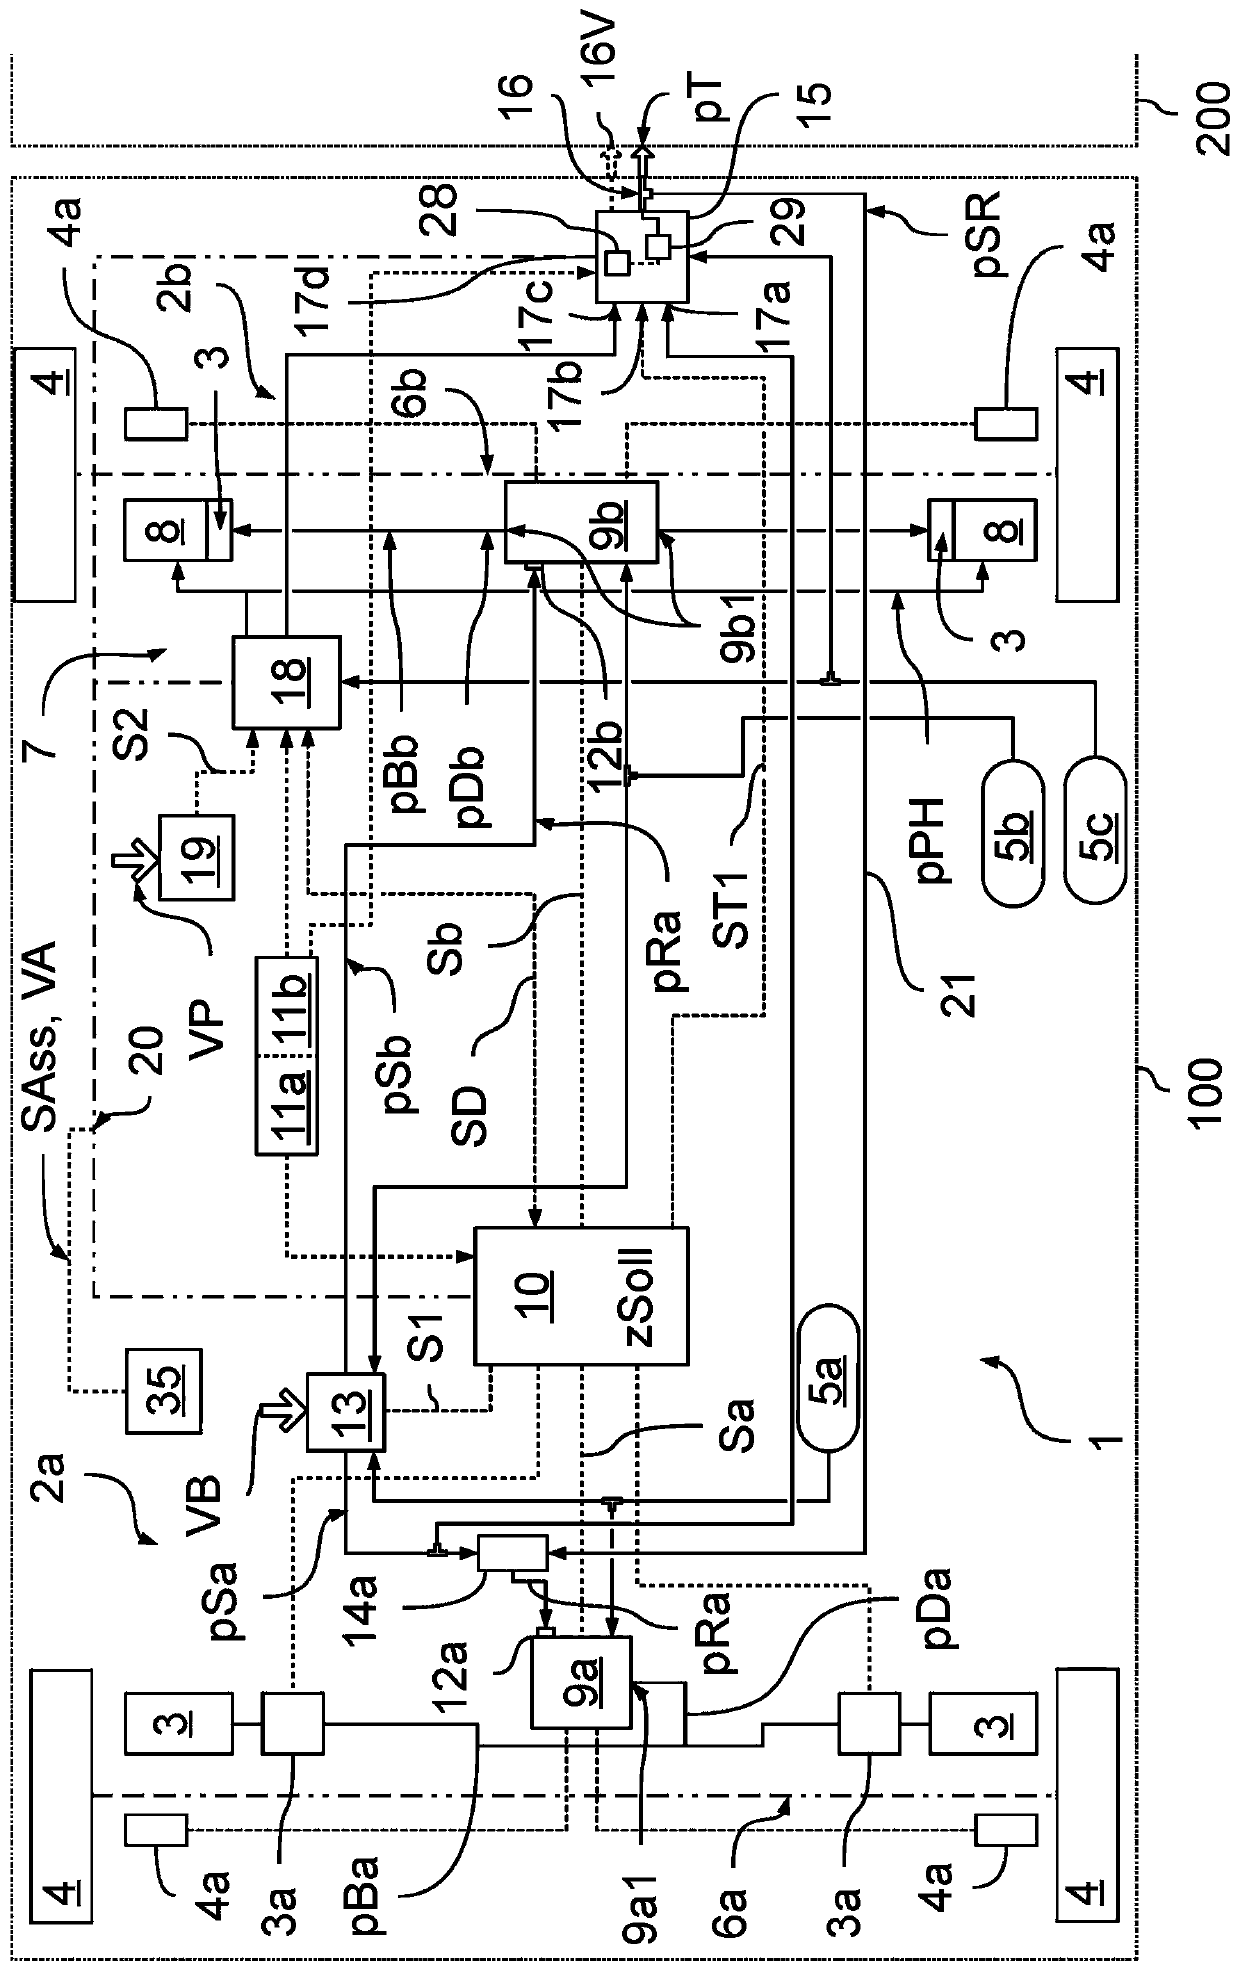 Electronically controllable braking system and method for controlling the electronically controllable braking system